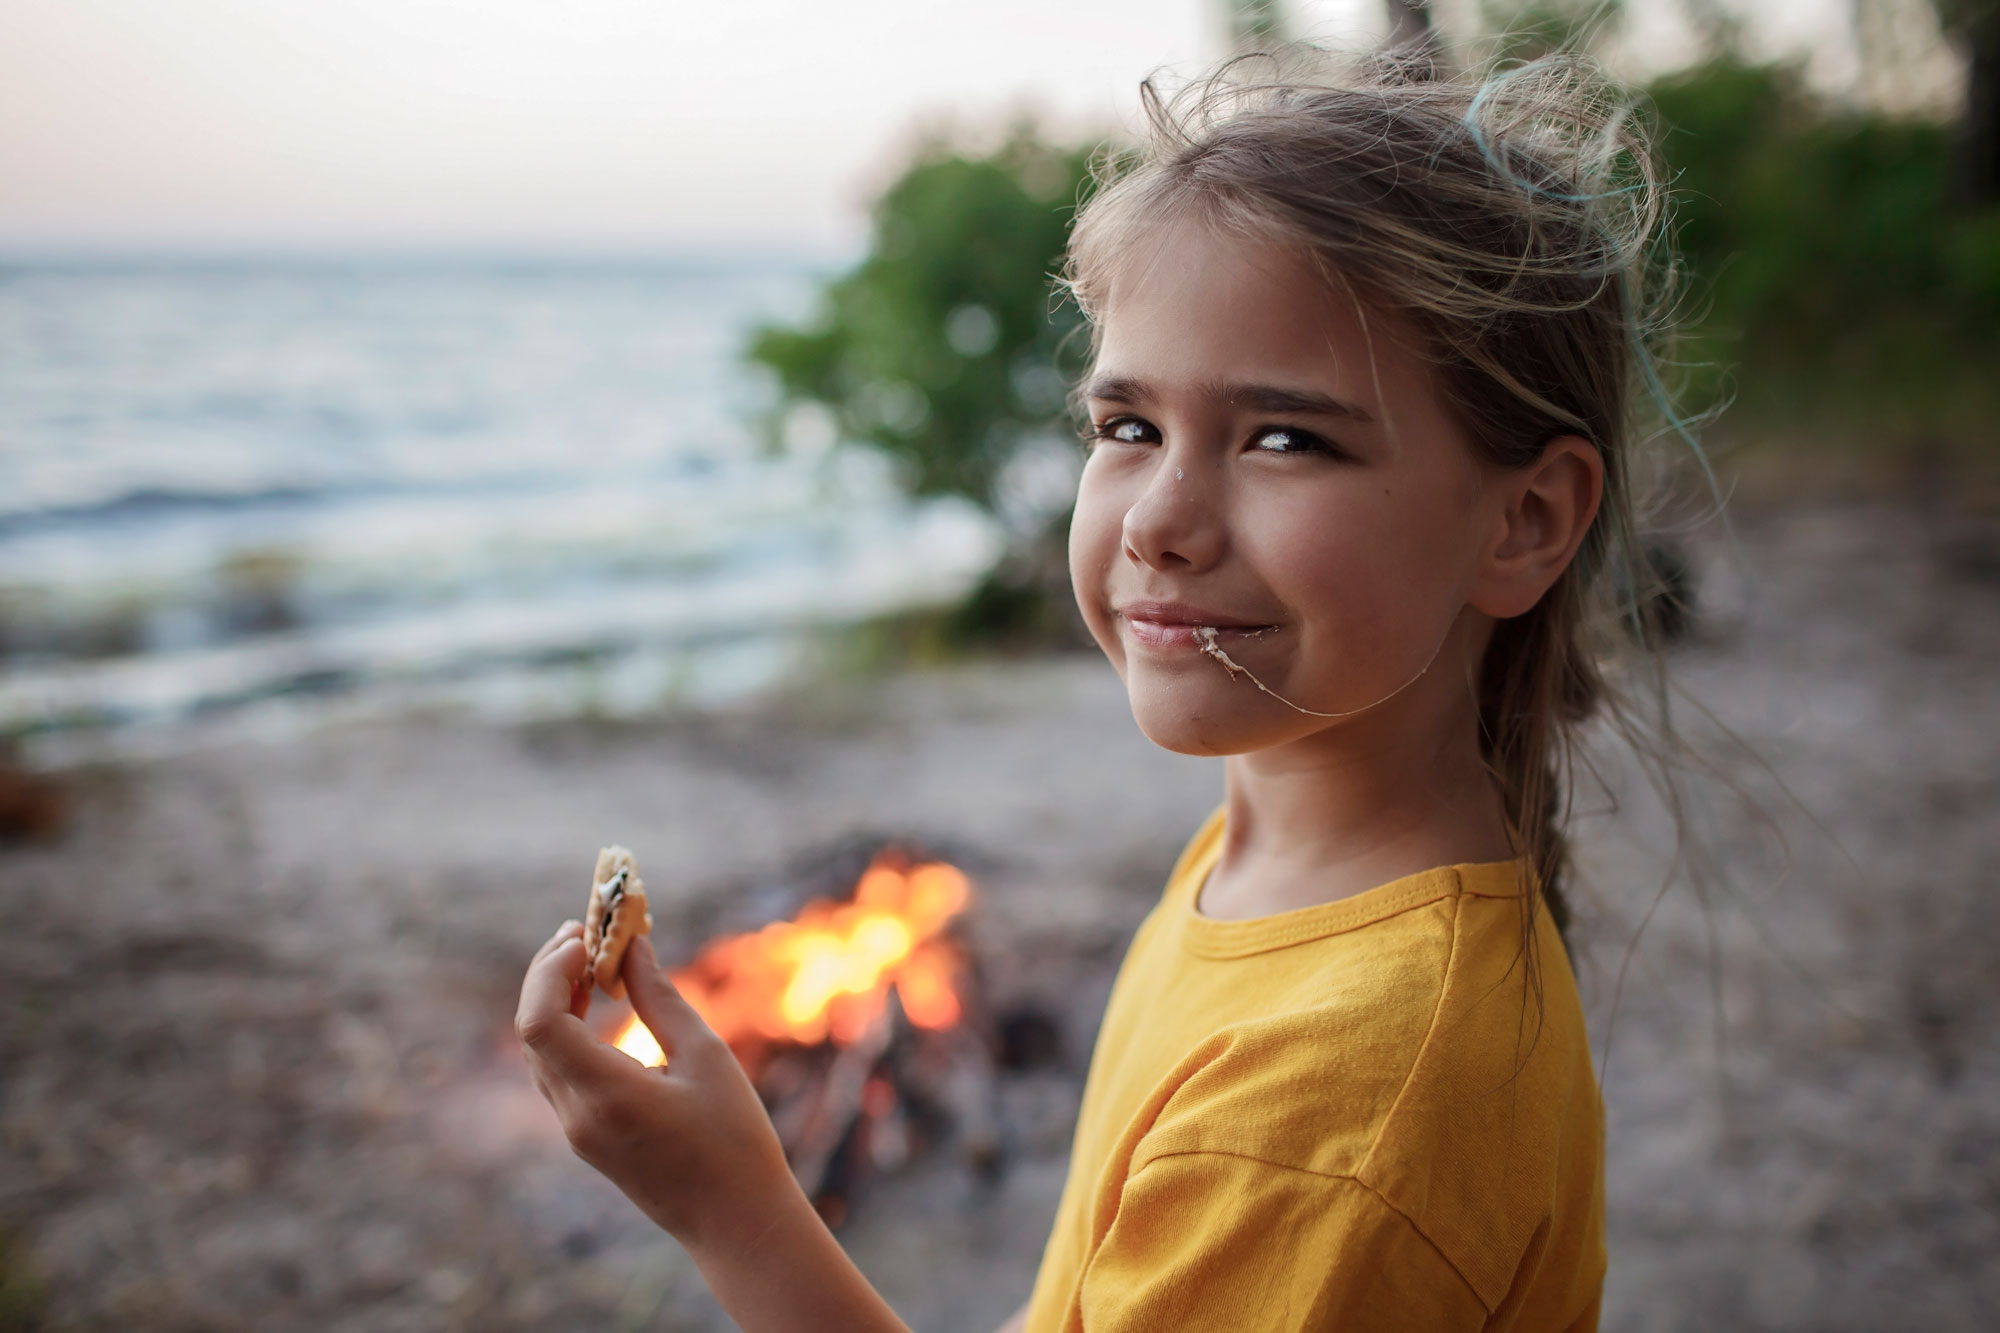 Girl eating a s'more in front of a campfire